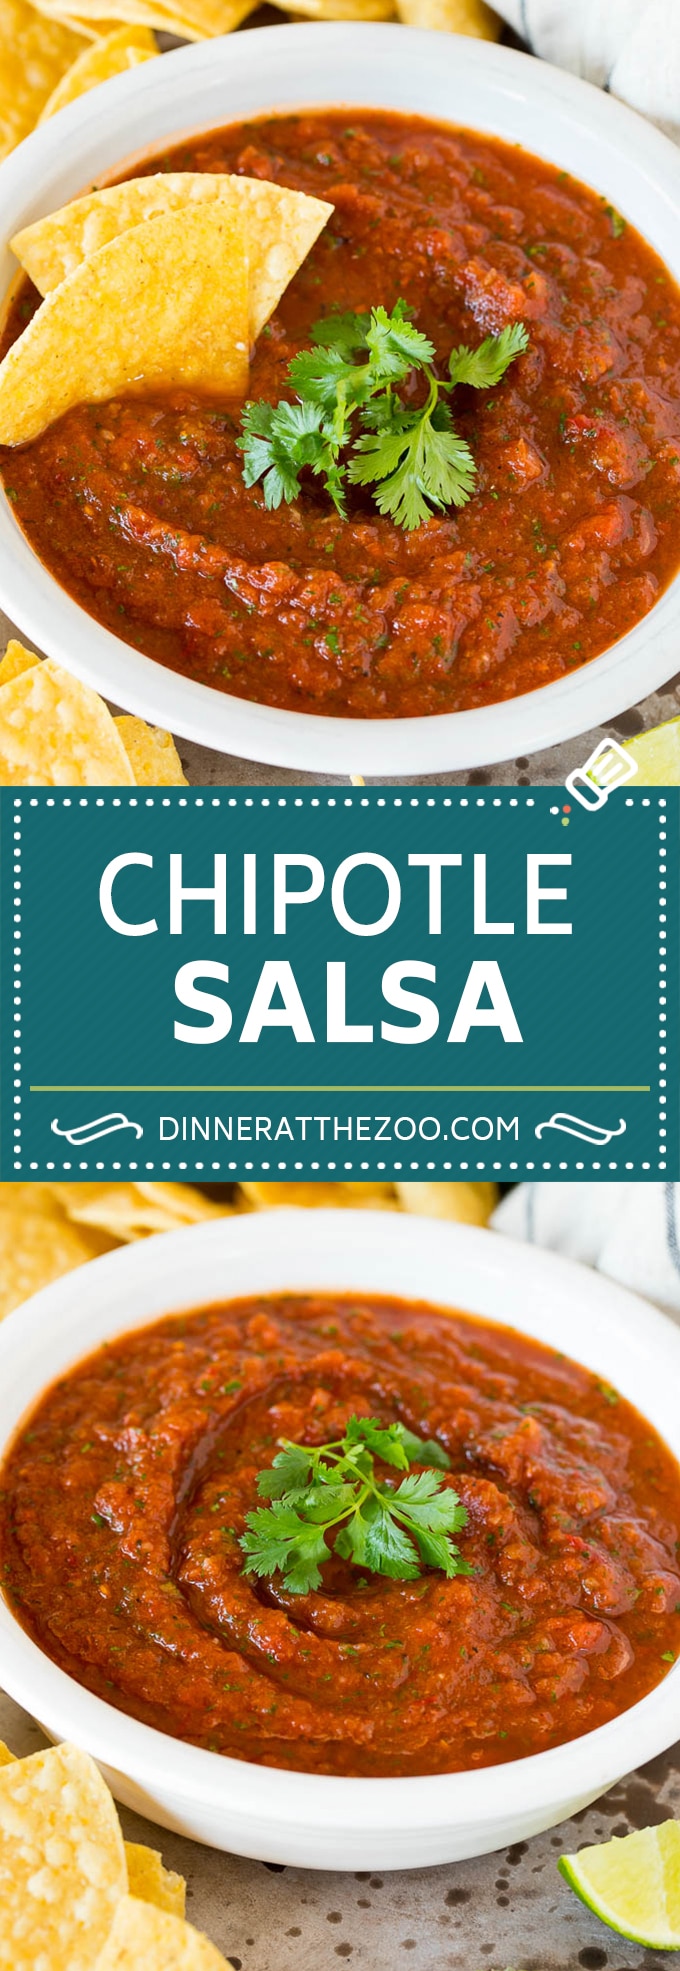 This chipotle salsa is a blend of fire roasted tomatoes, onion, chipotle peppers, cilantro and lime juice, all mixed together to make a smoky and spicy salsa.